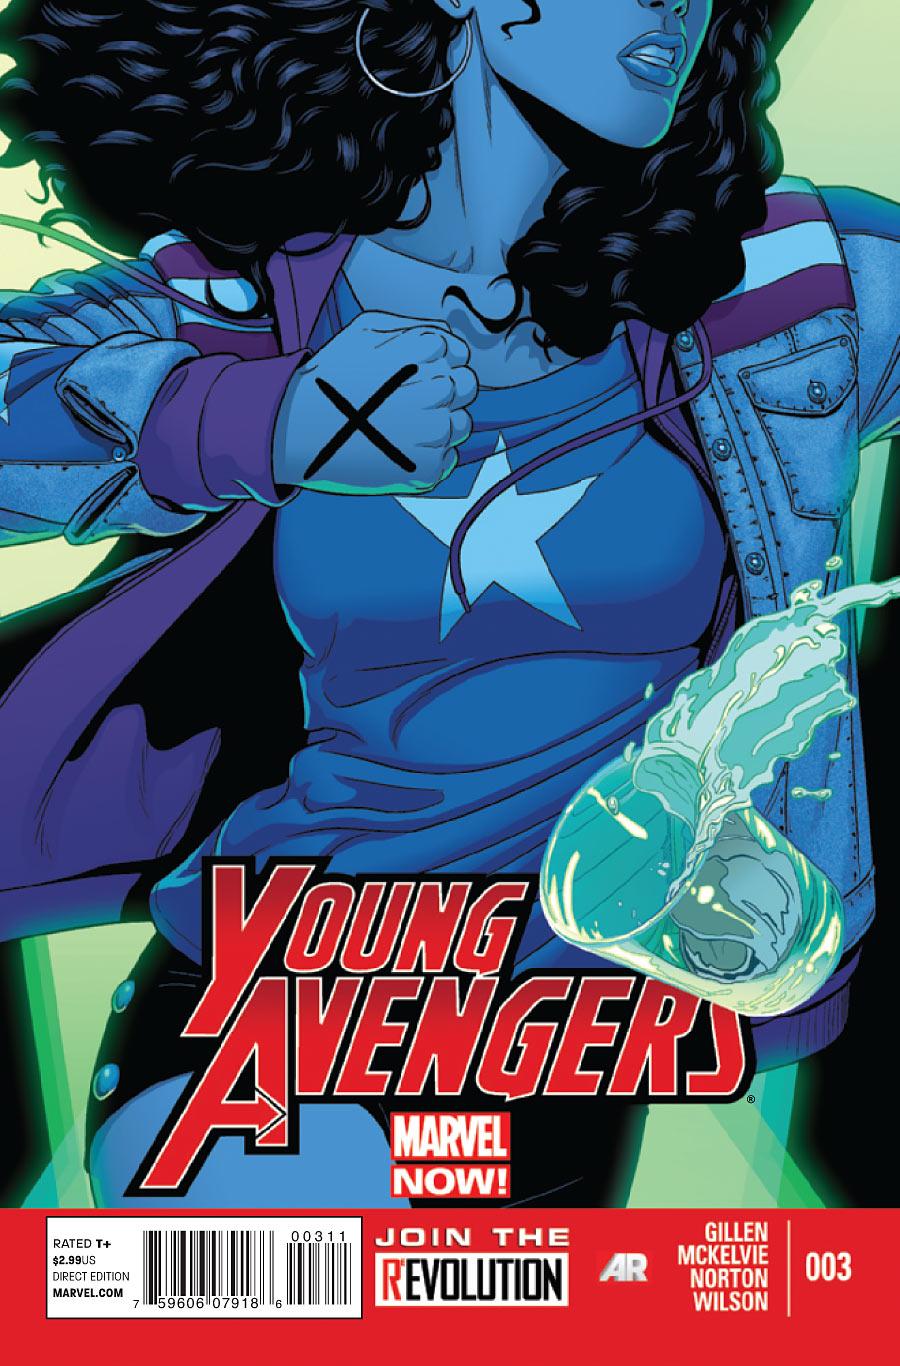 Young Avengers Vol. 2 #3